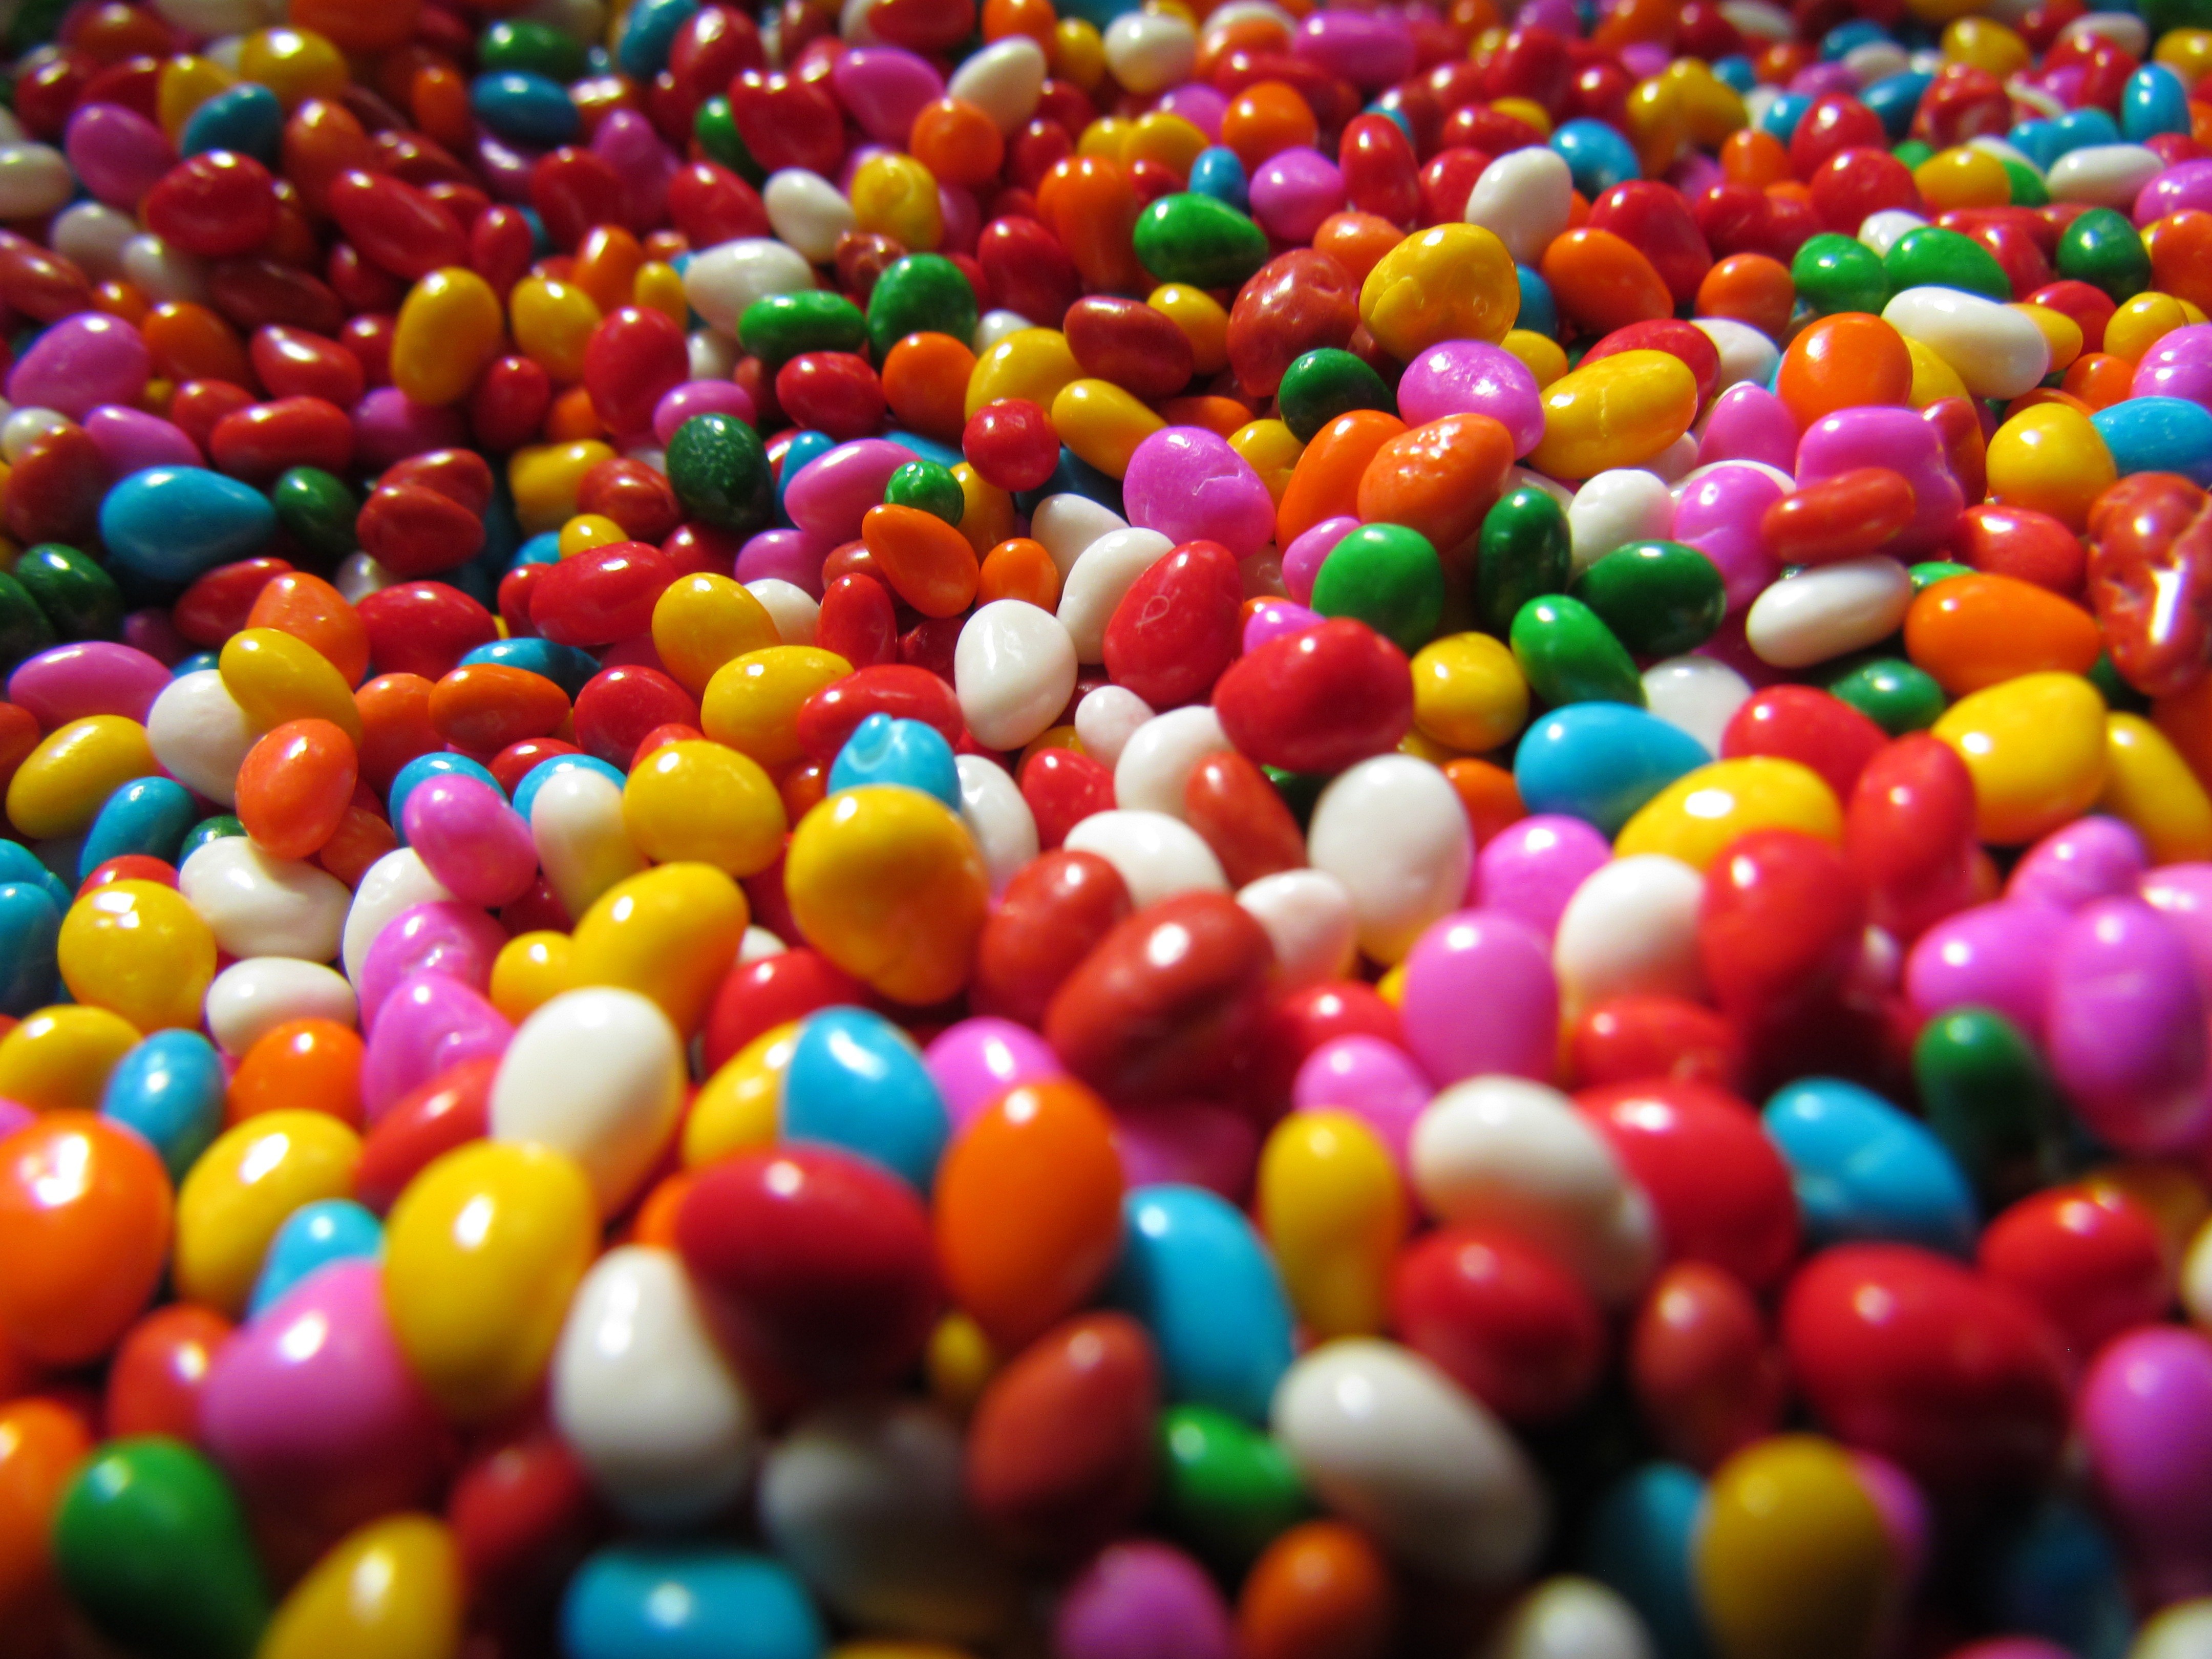 Wallpaper, colorful, food, macro, candies, sprinkles, dessert, Confectionery, color, candy, sweetness, jelly bean, nonpareils 4320x3240